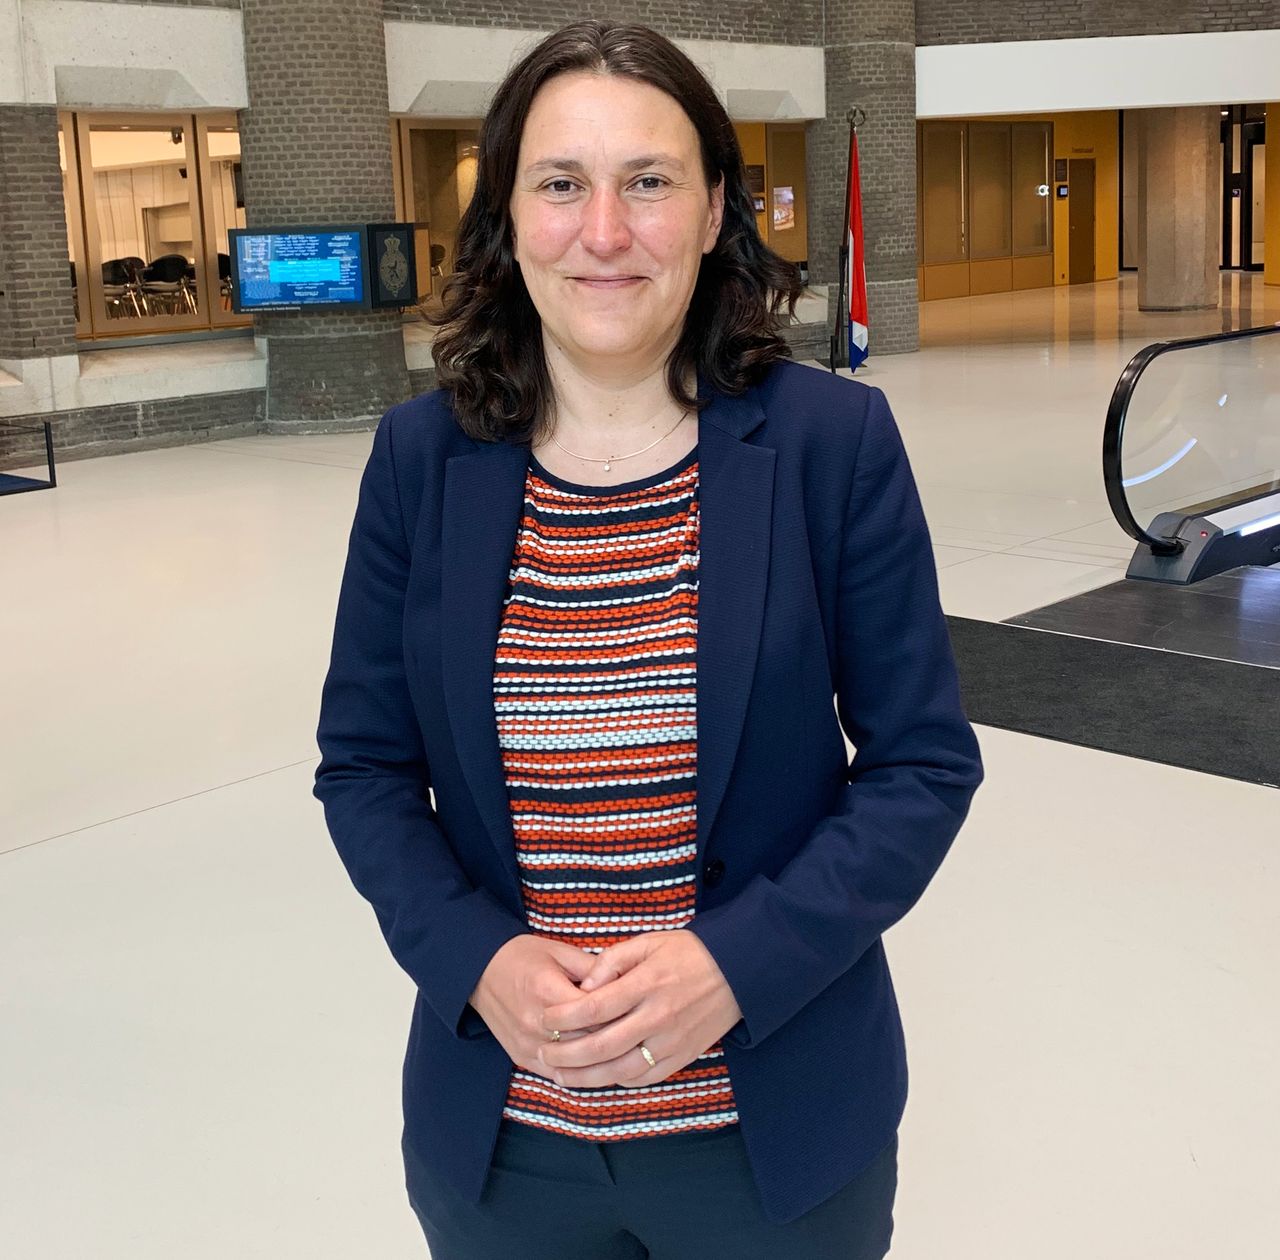 Kati Piri is one of three Dutch lawmakers challenging her country's government over whether it protected the International Criminal Court against alleged Israeli espionage.